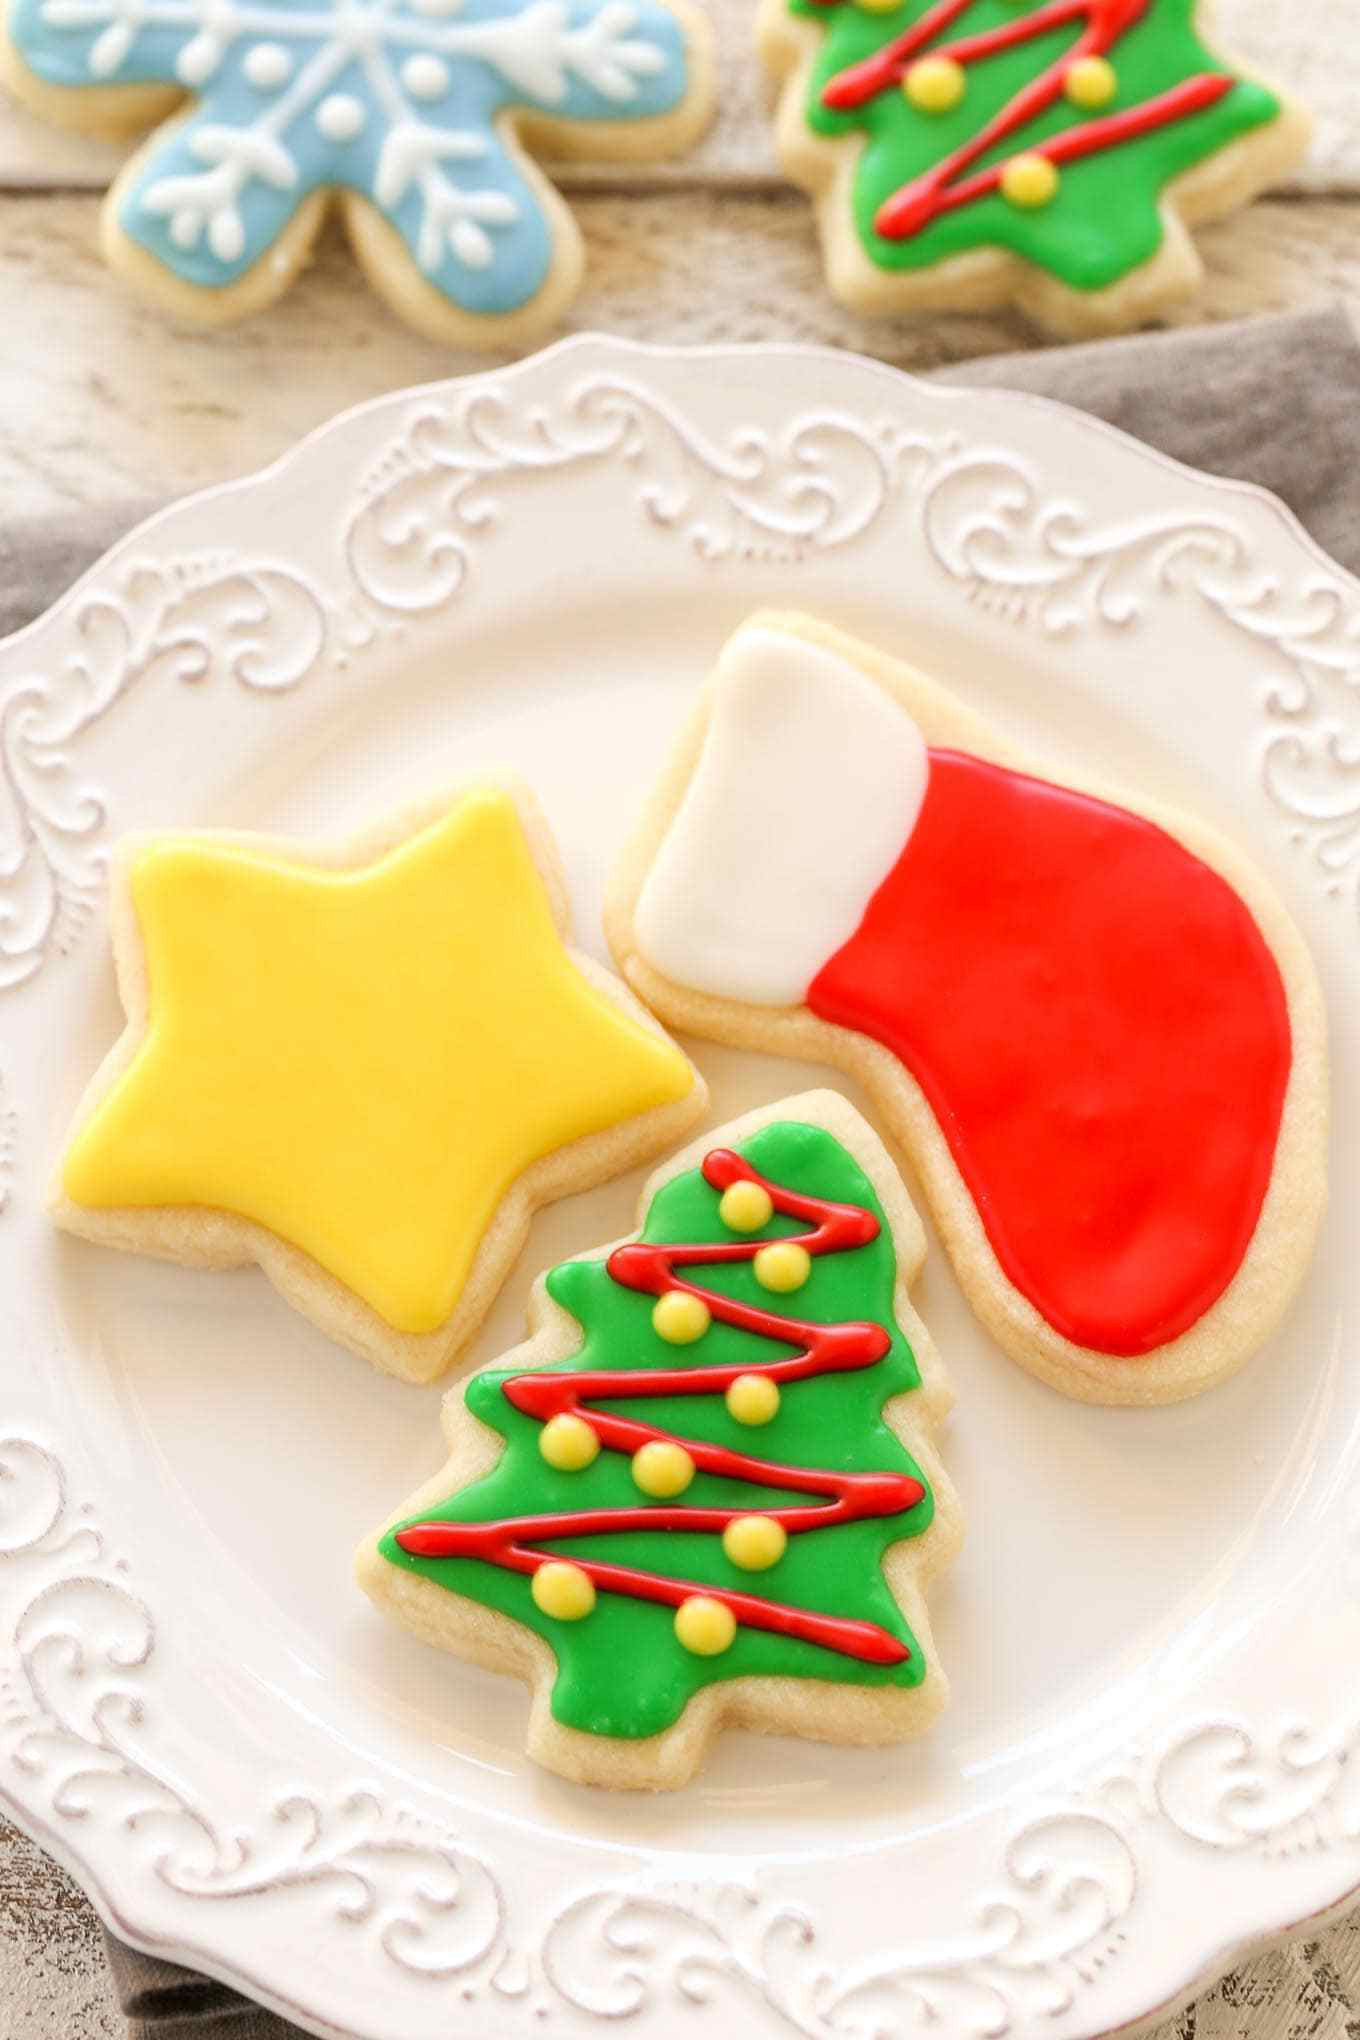 Christmas Sugar Cookies With Icing
 Soft Christmas Cut Out Sugar Cookies Live Well Bake ten